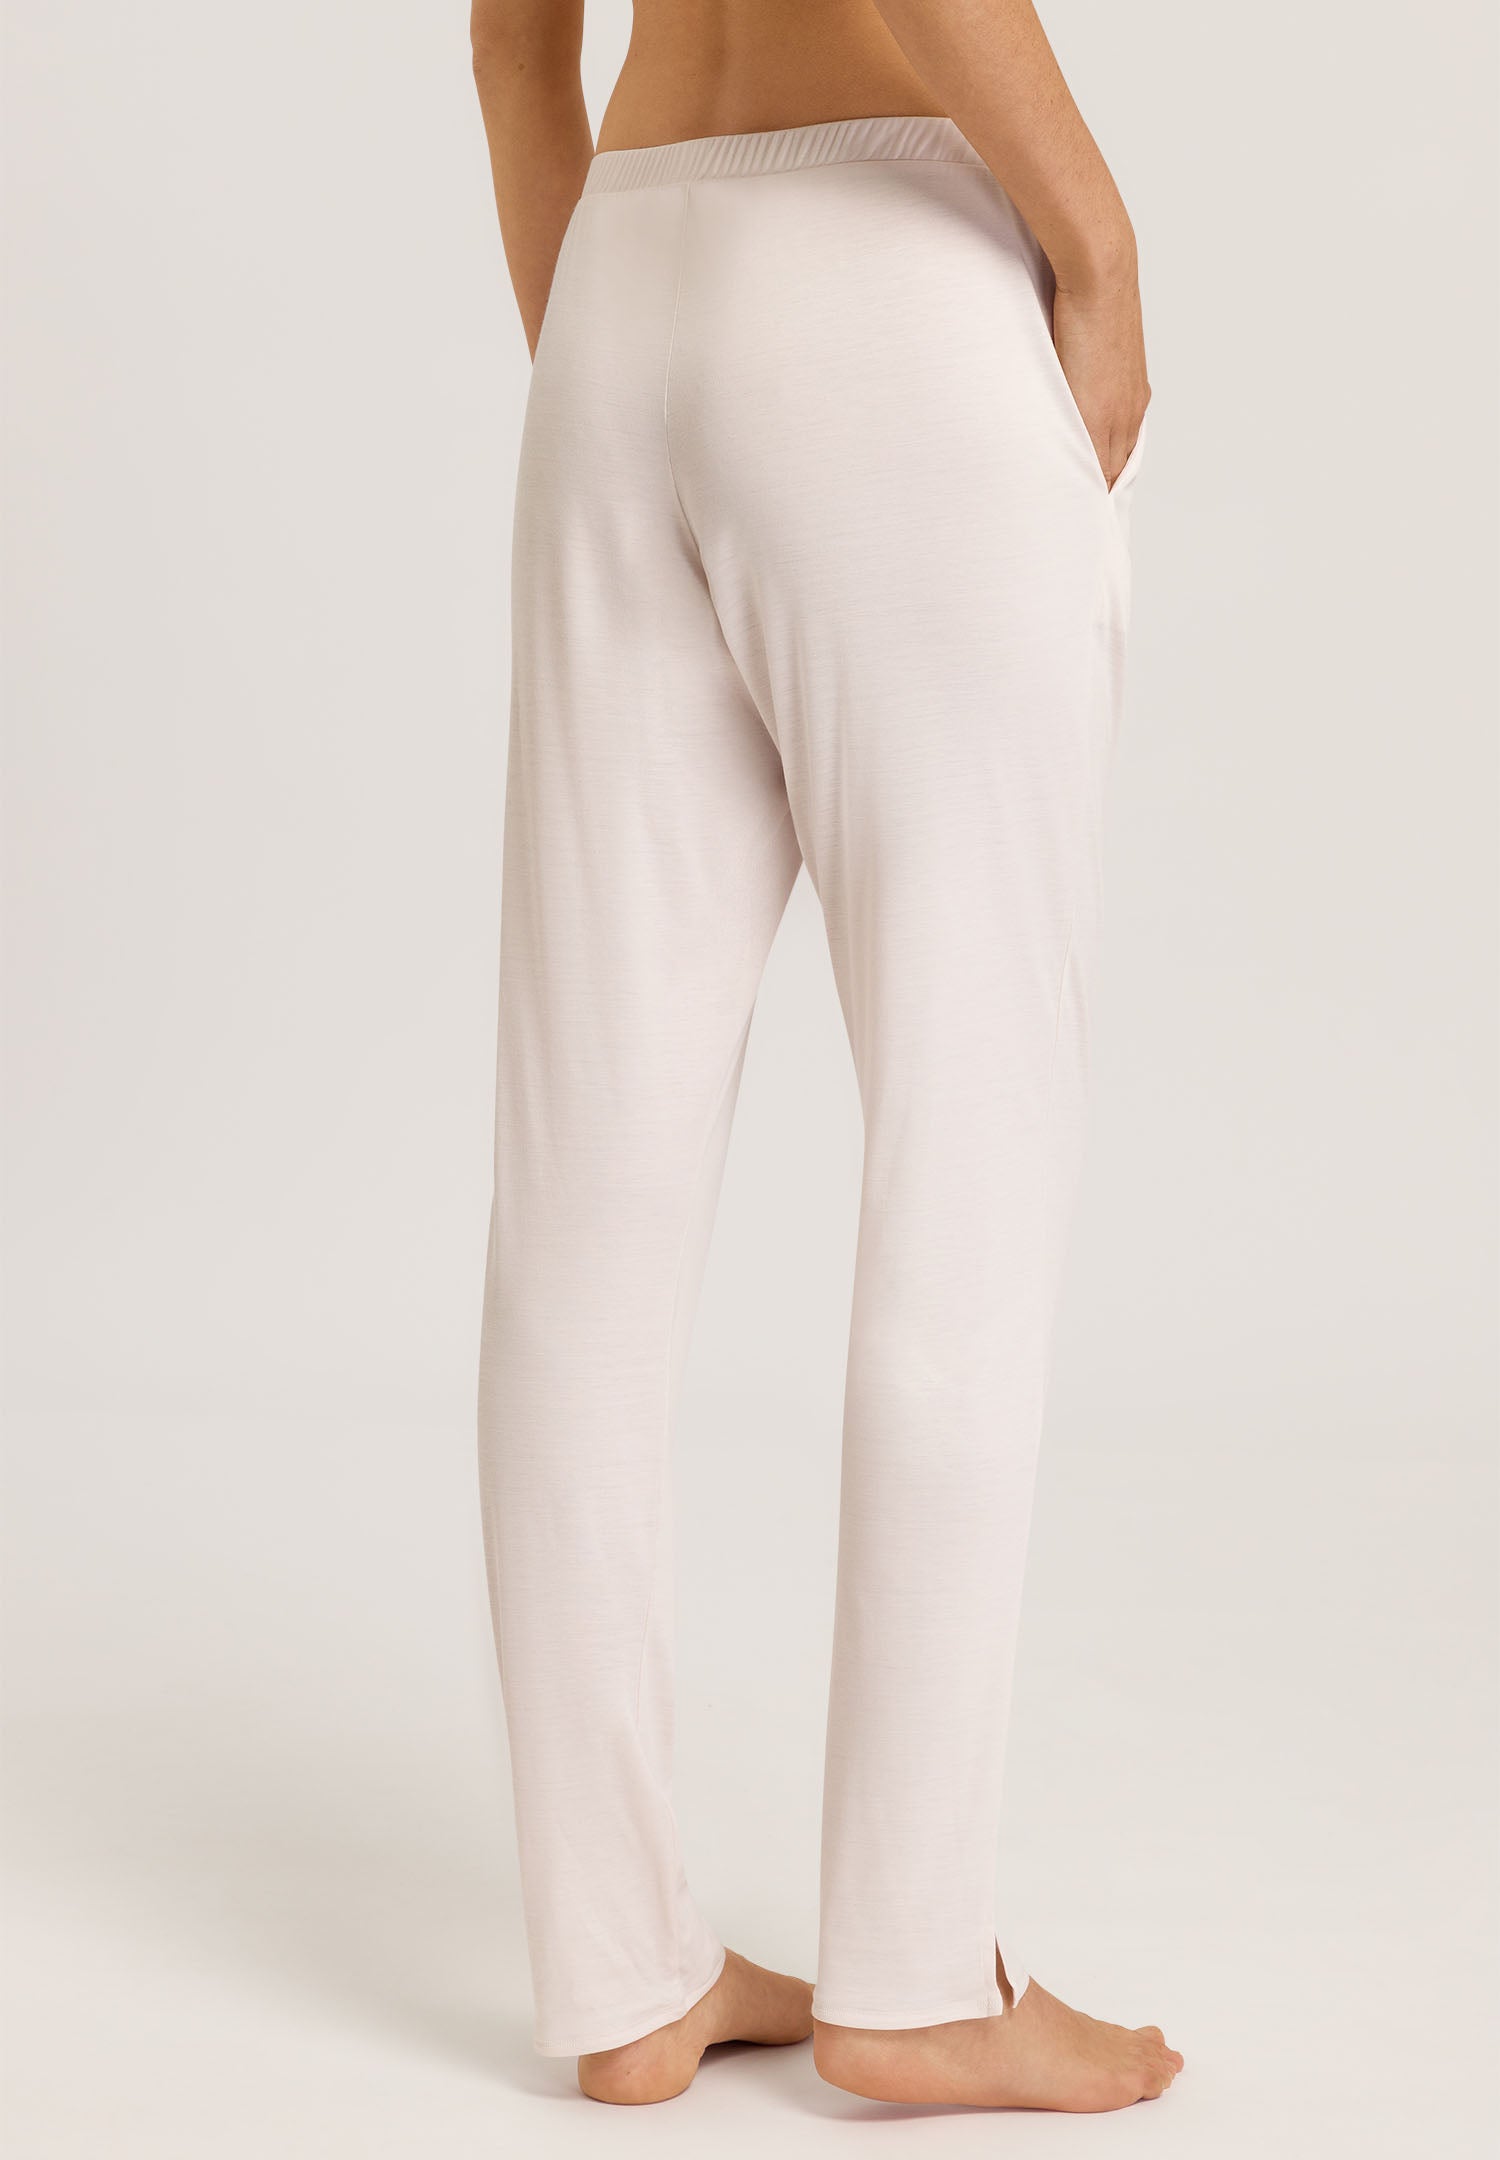 77409 Grand Central Knit Pant - 1233 Moonlight